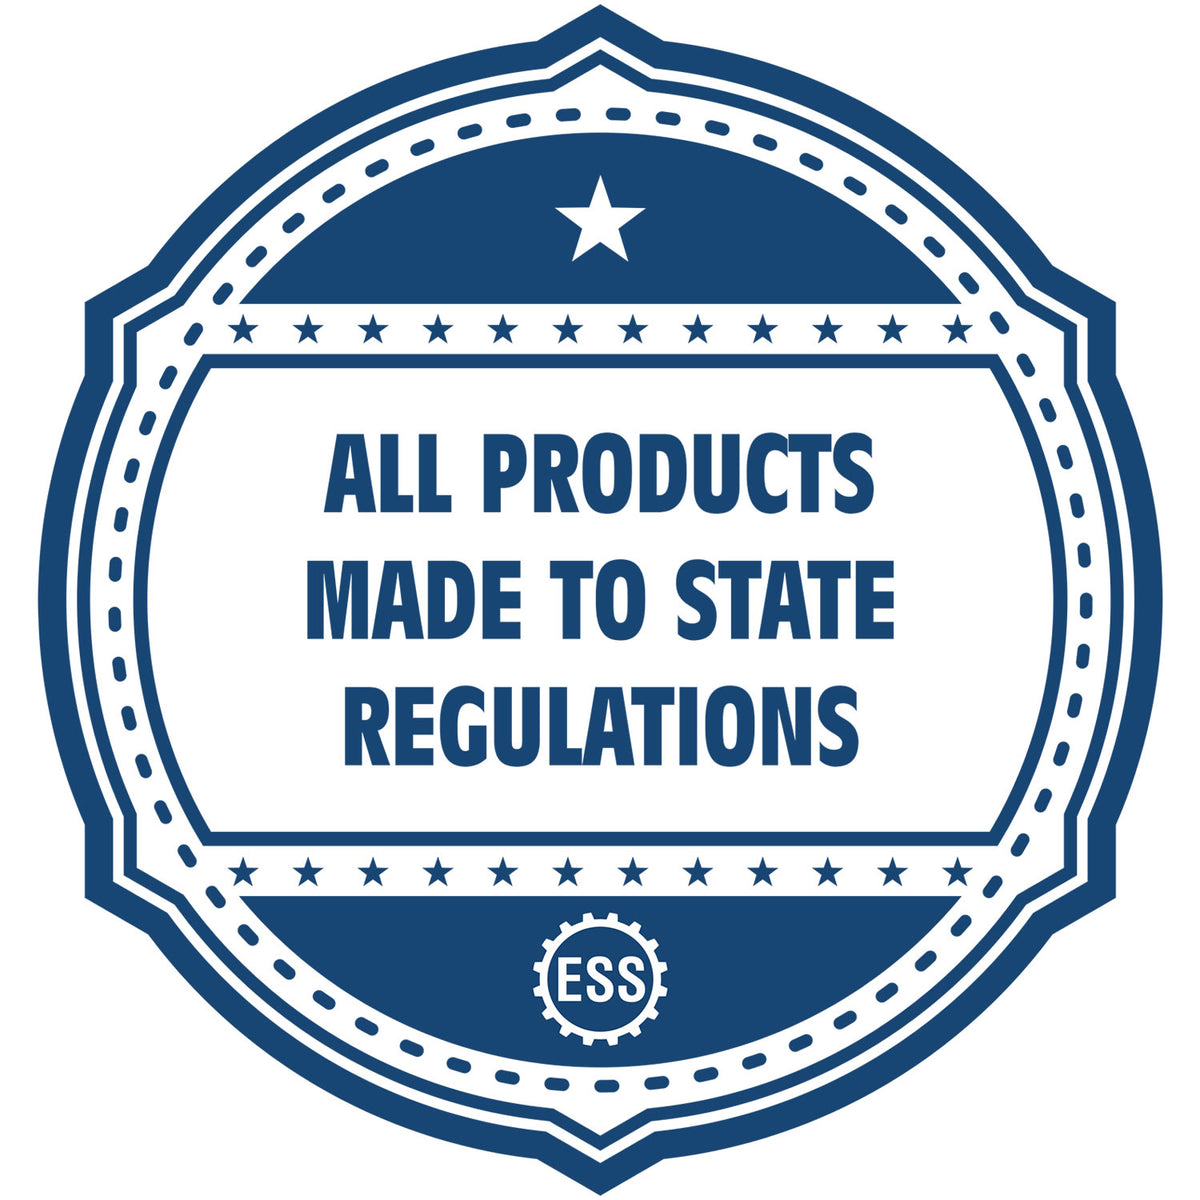 An icon or badge element for the Alabama Desk Architect Embossing Seal showing that this product is made in compliance with state regulations.